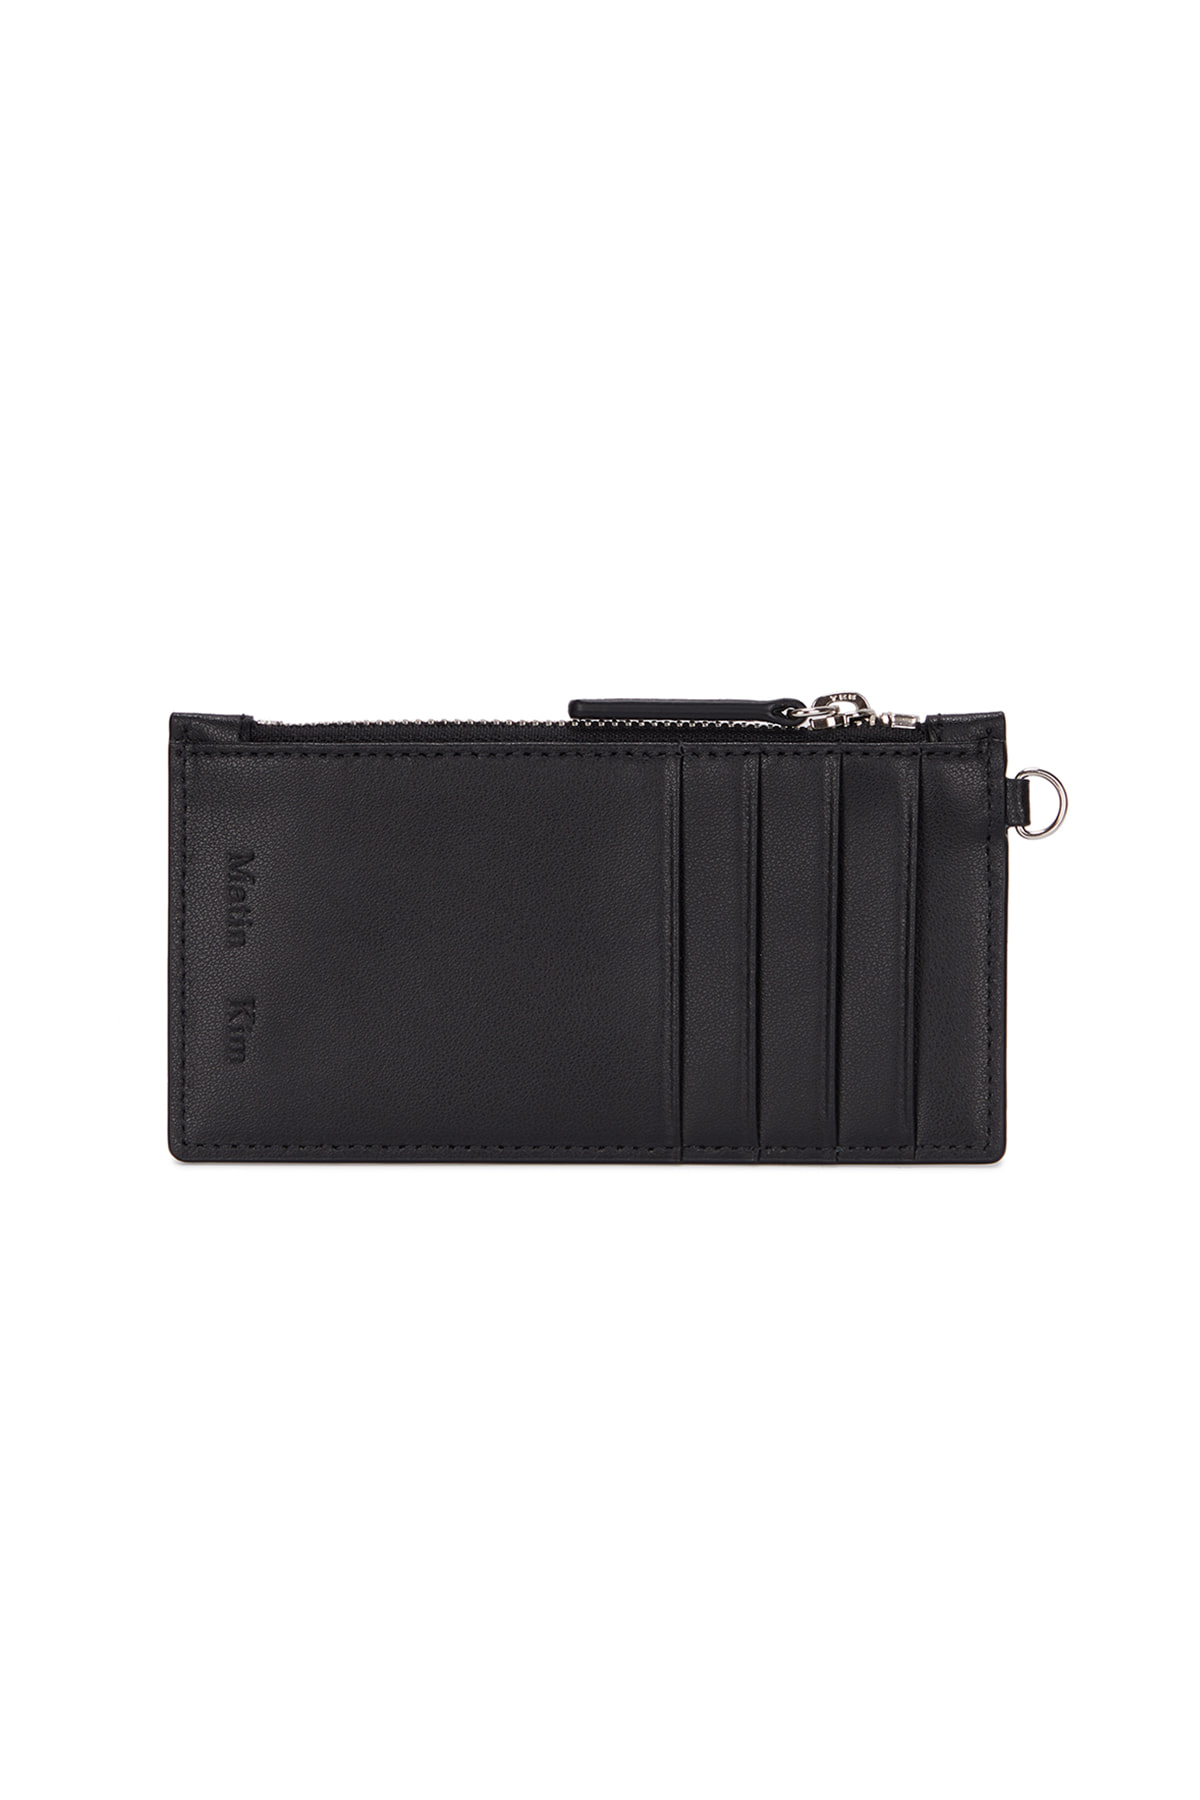 MATIN KIM NECKLACE WALLET IN BLACK